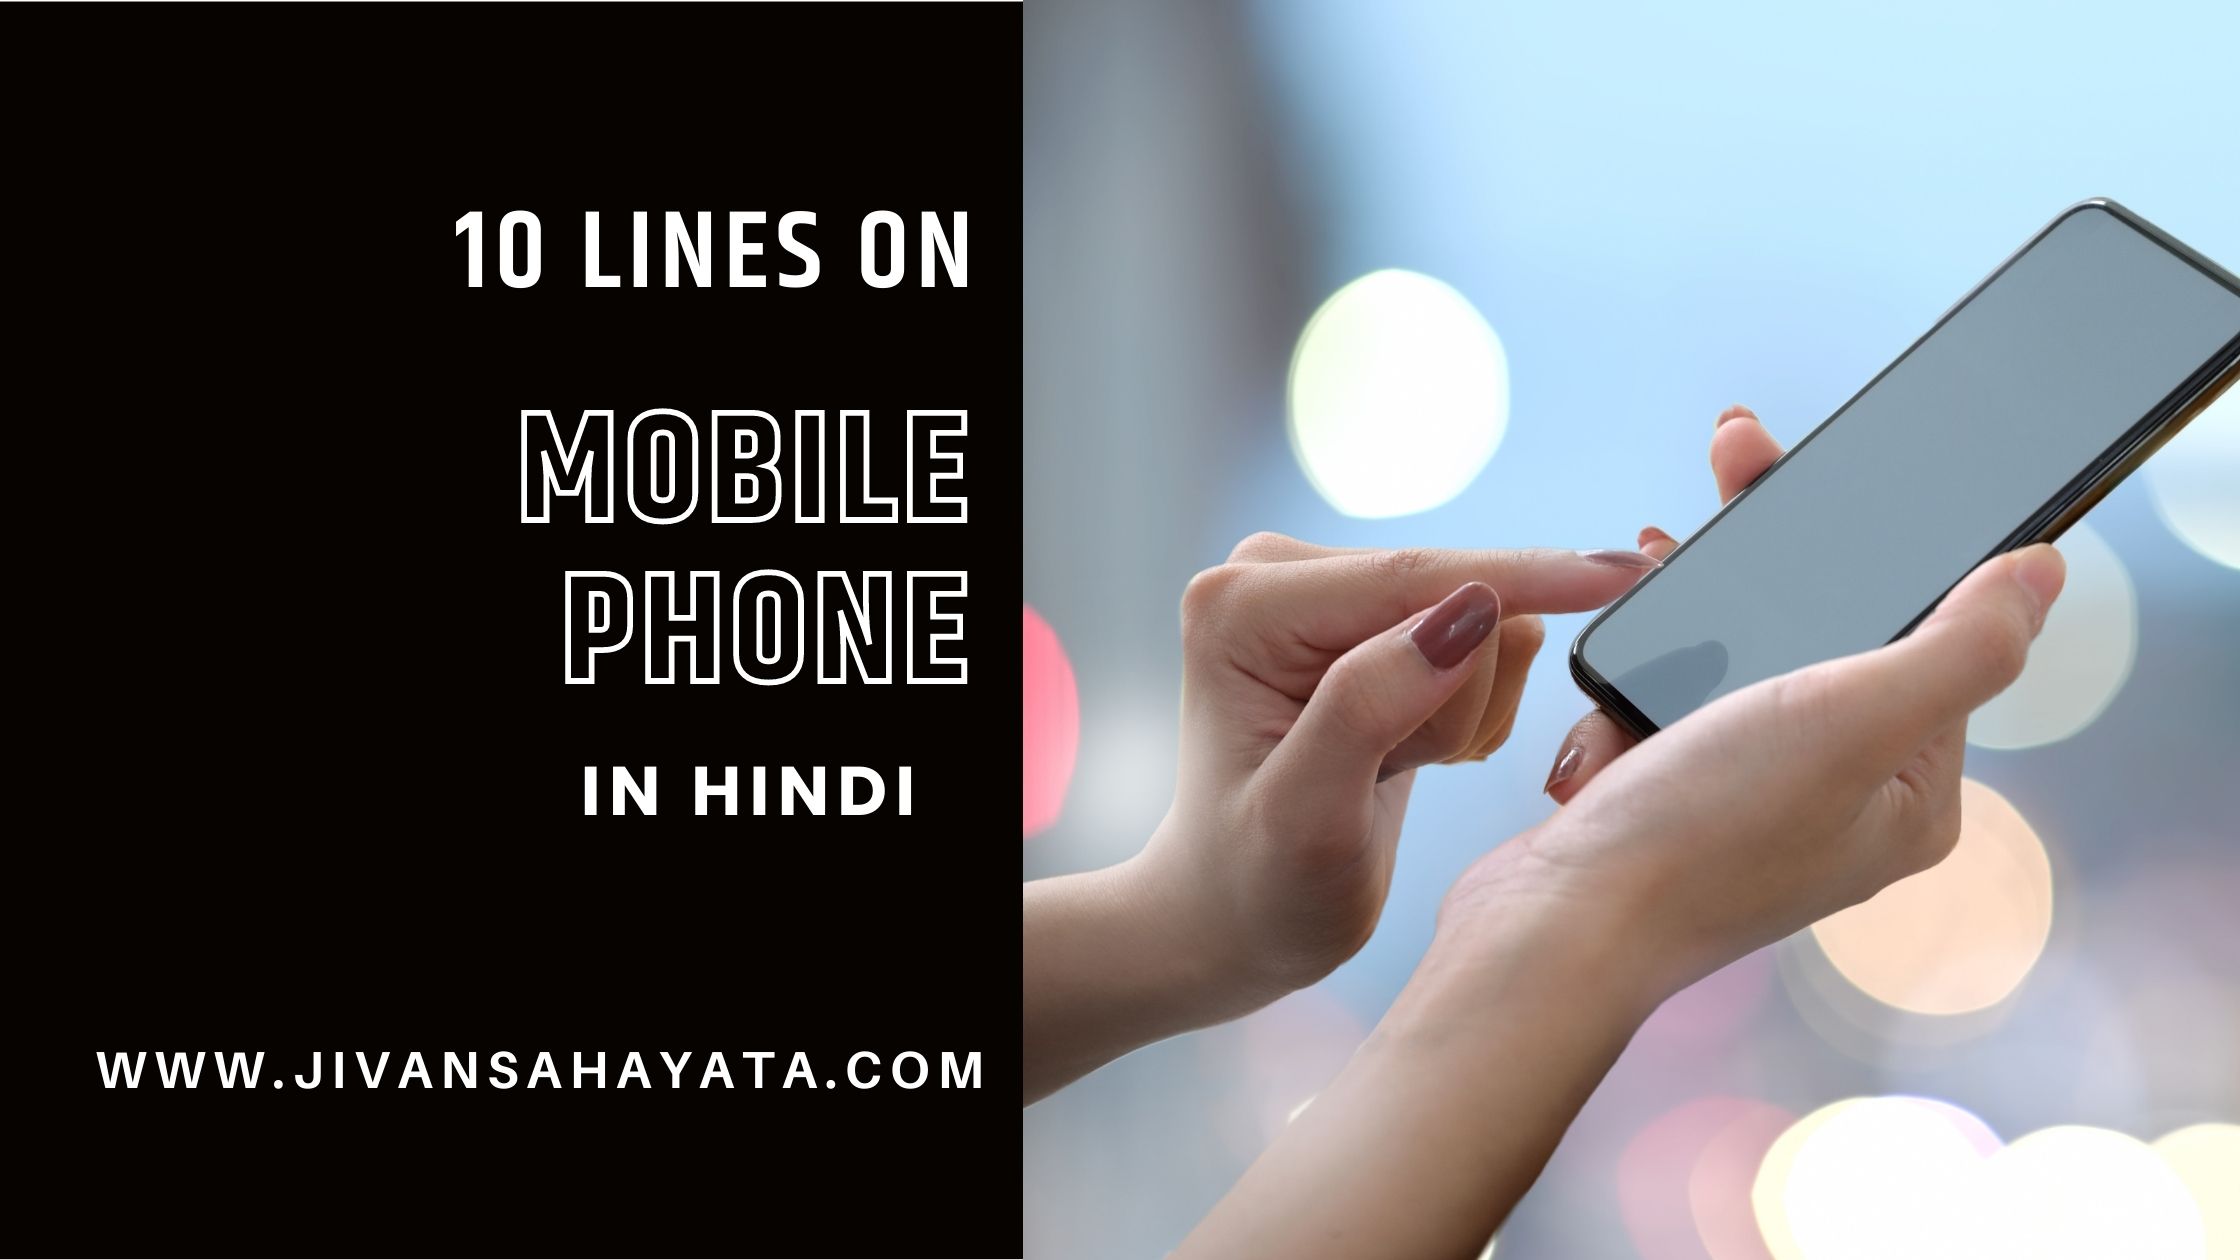 मोबाइल फोन पर 10 लाइन - 10 lines on Mobile Phone in Hindi